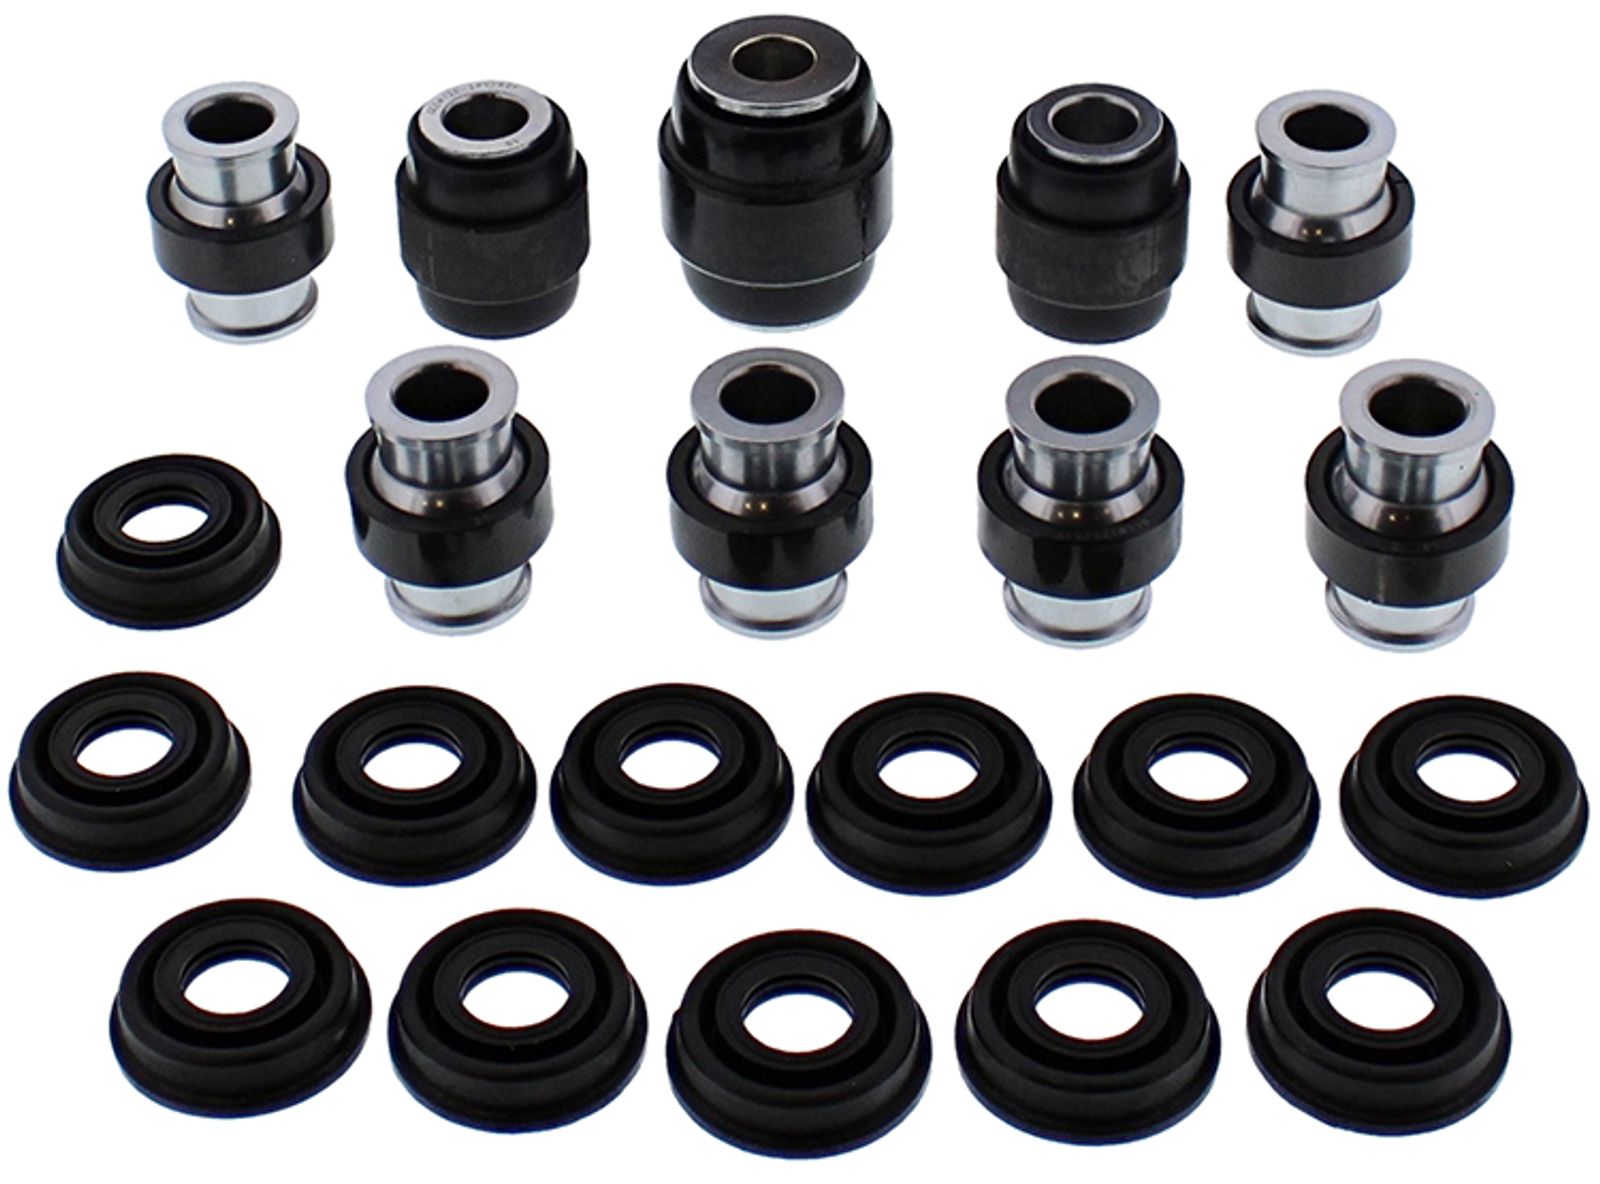 Wrp Rear Ind. Suspension Kits - WRP501183 image